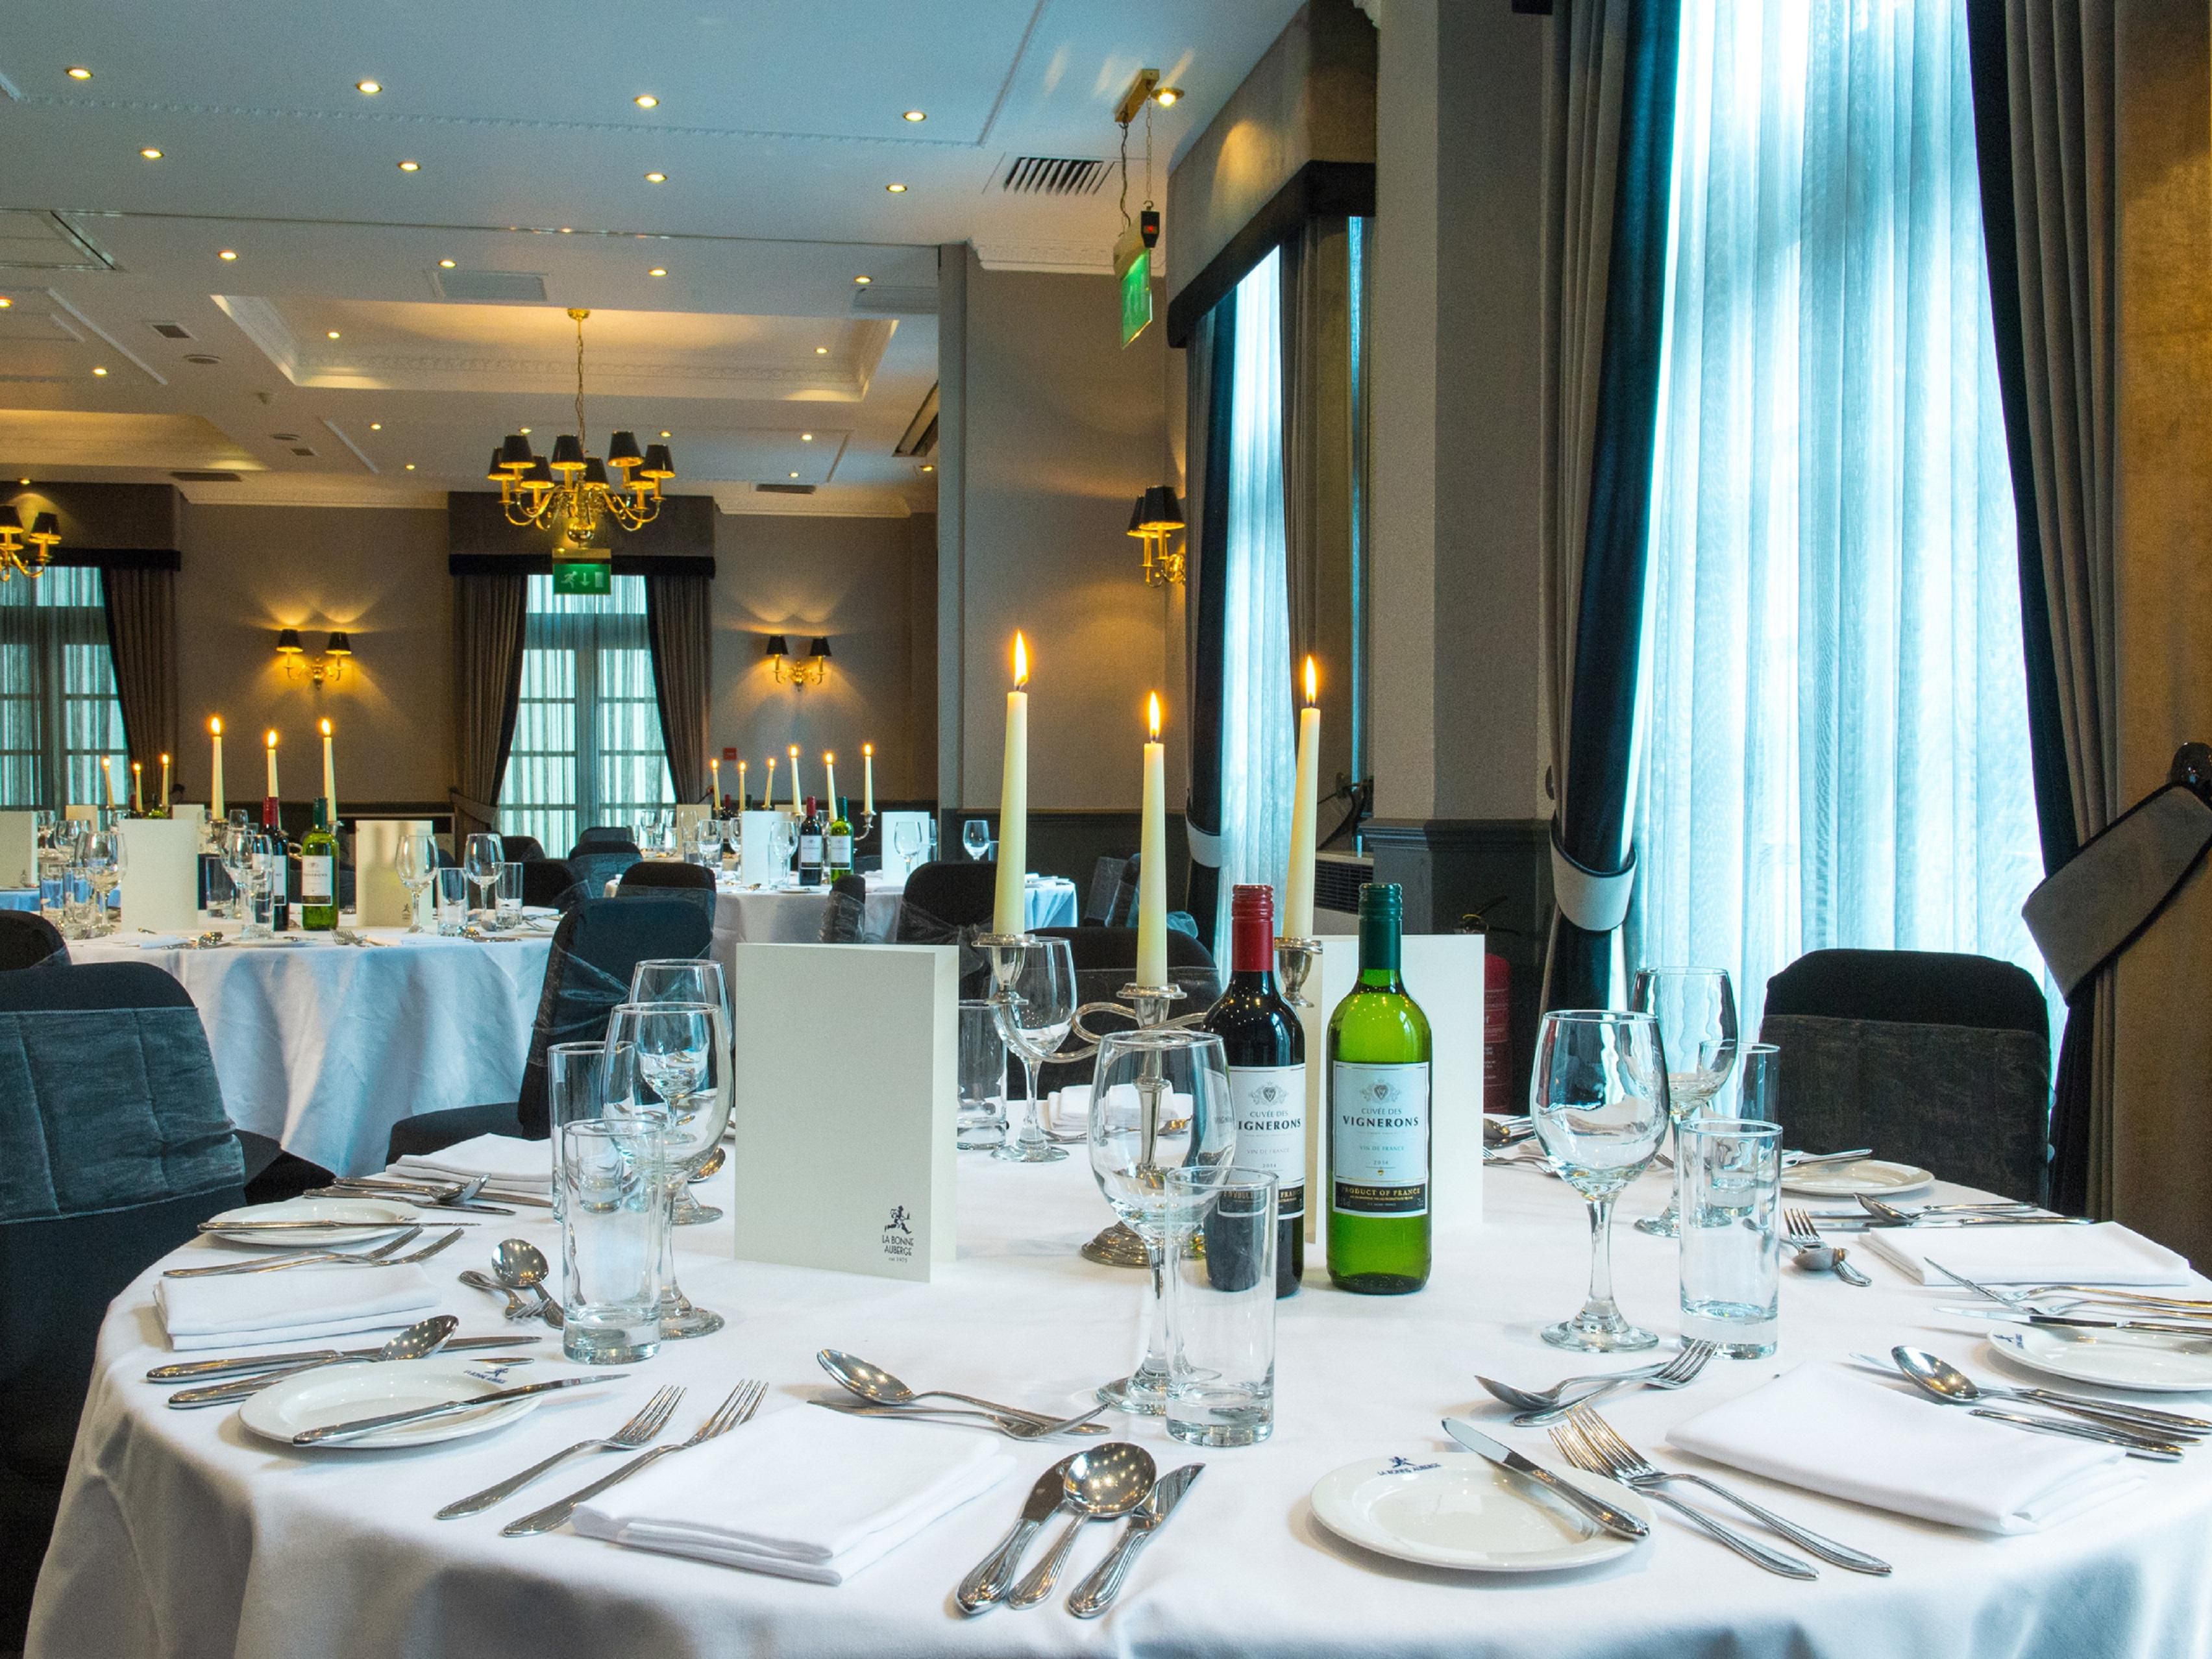 If you want to organise an unforgettable event, whether it is an anniversary, baby shower, milestone birthday or an extraordinary wedding reception, stop your location-scouting and book with the Holiday Inn Glasgow City Centre Theatreland Hotel today for high quality venue hire!